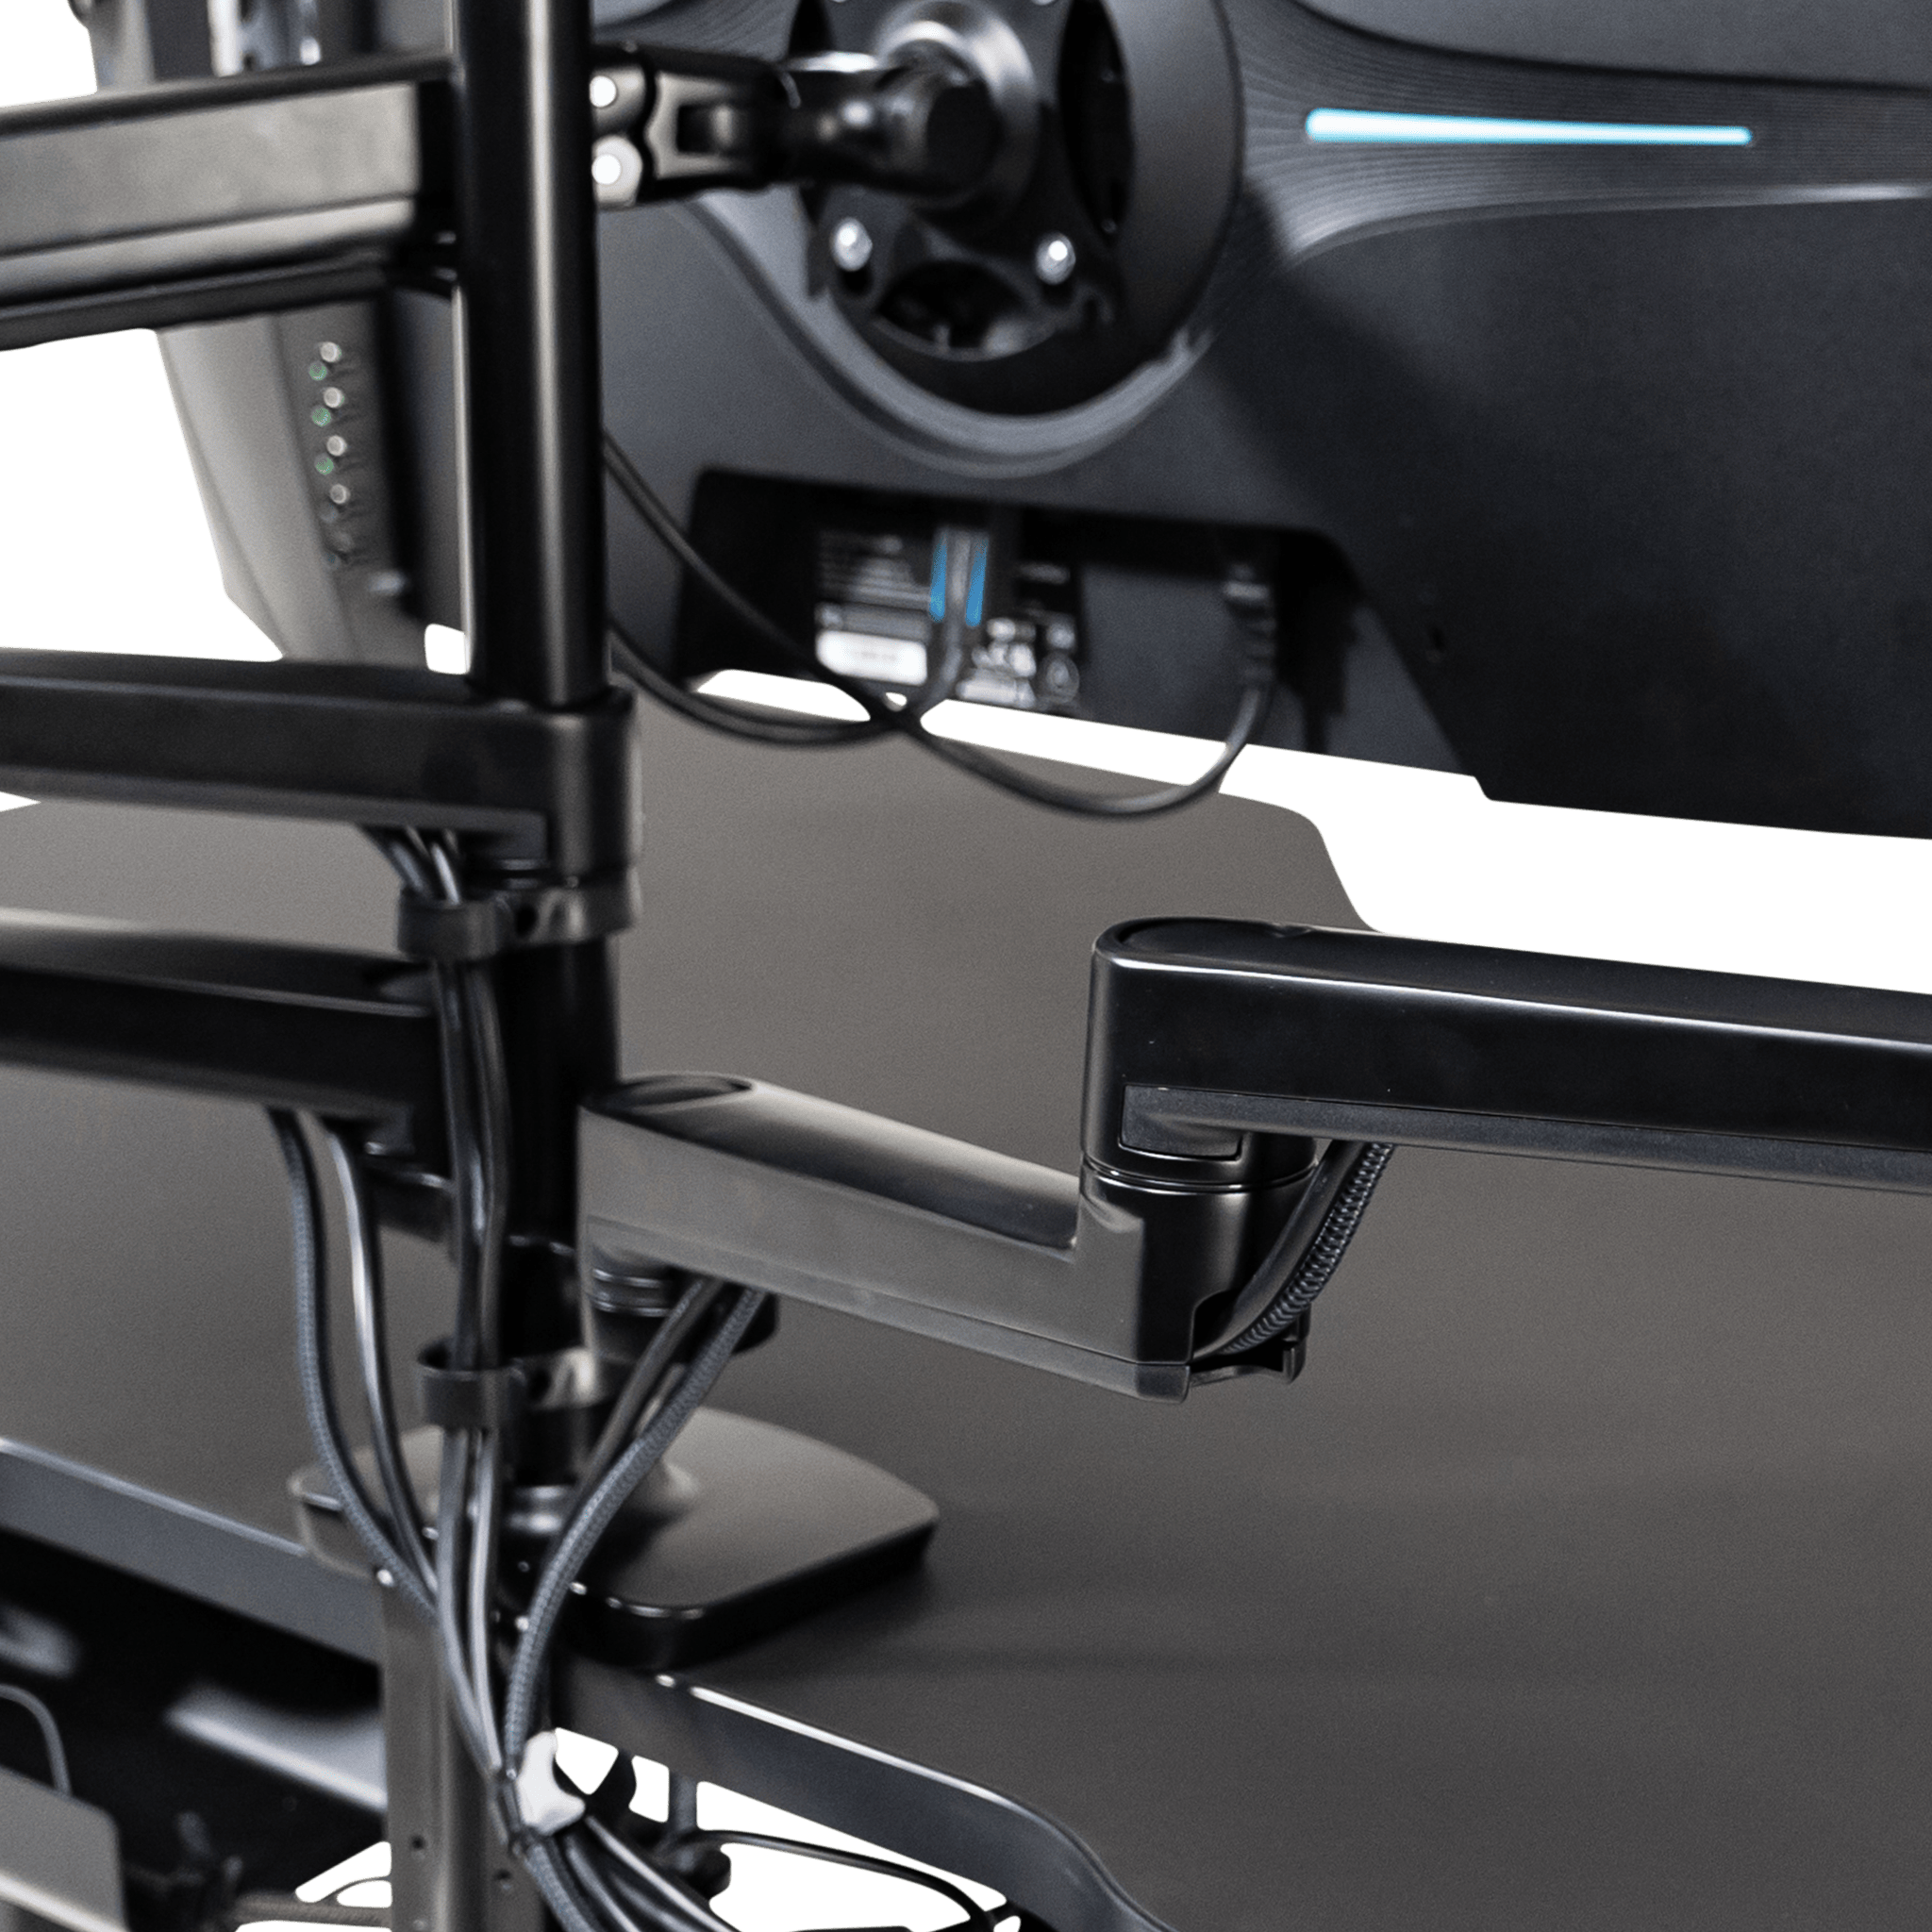 The LeetDesk triple monitor mount features double clamps and arm extensions